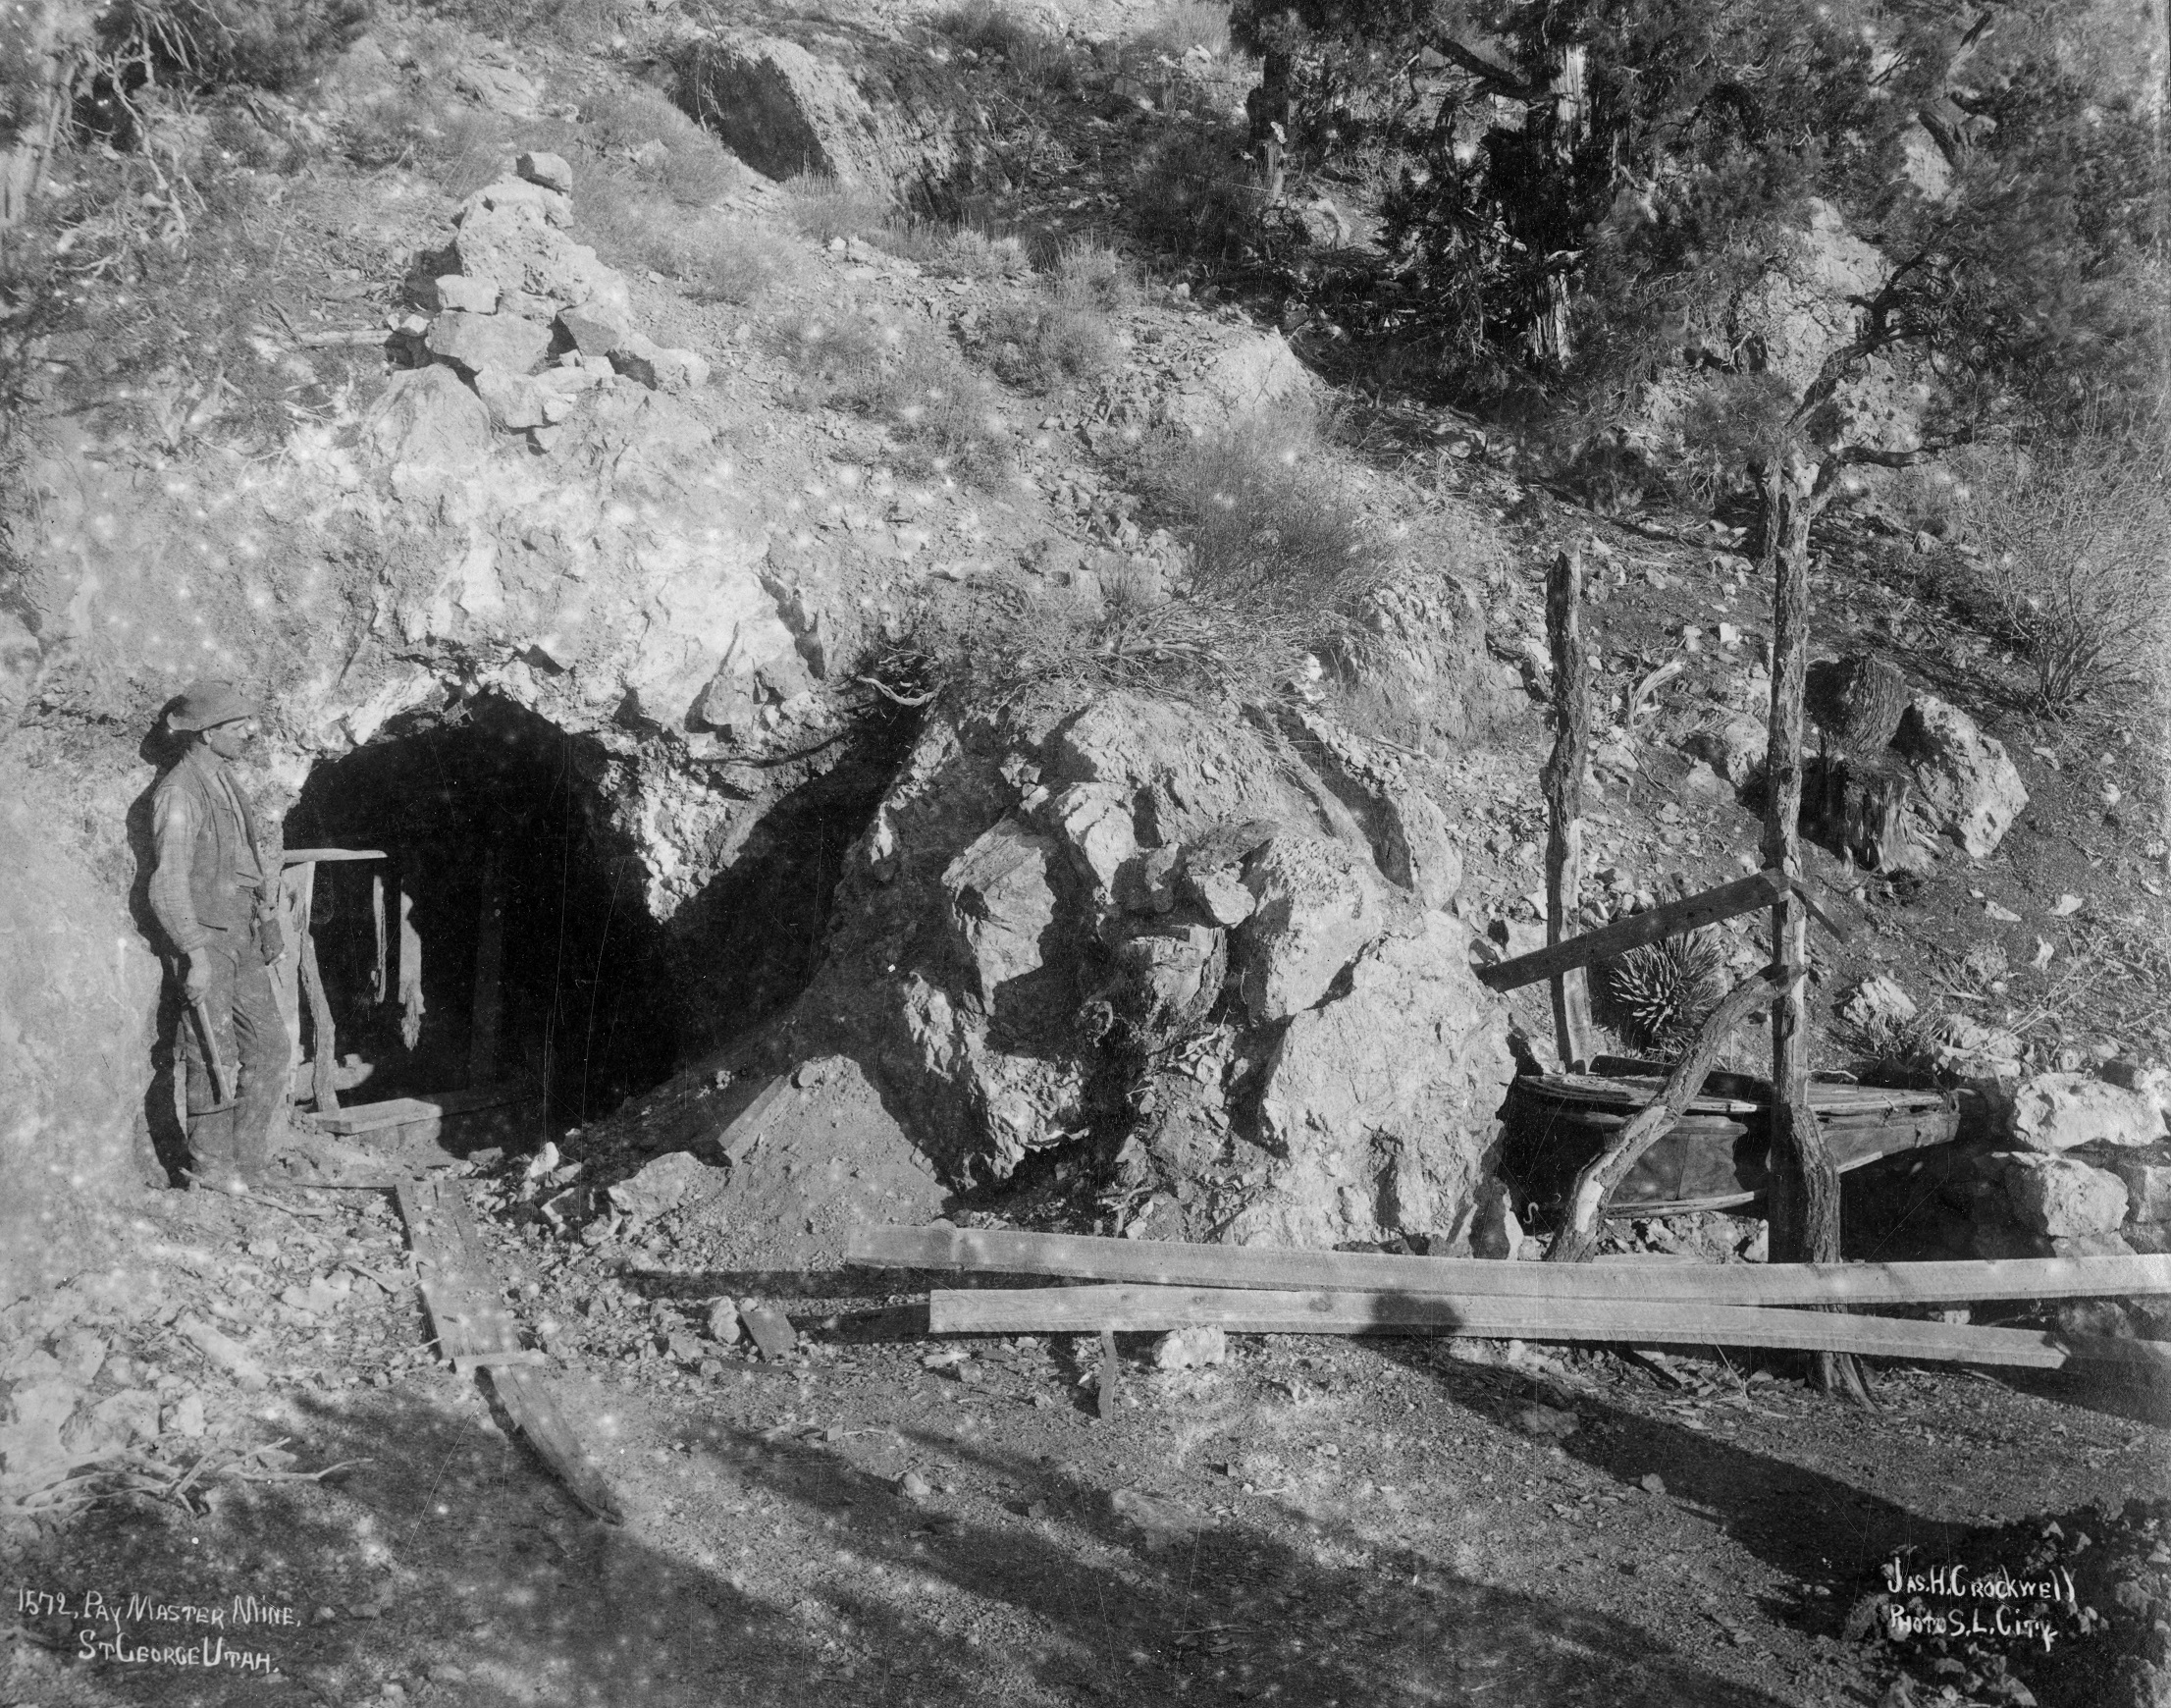 Entrance to the Paymaster Mine (now part of the Apex Mine complex)